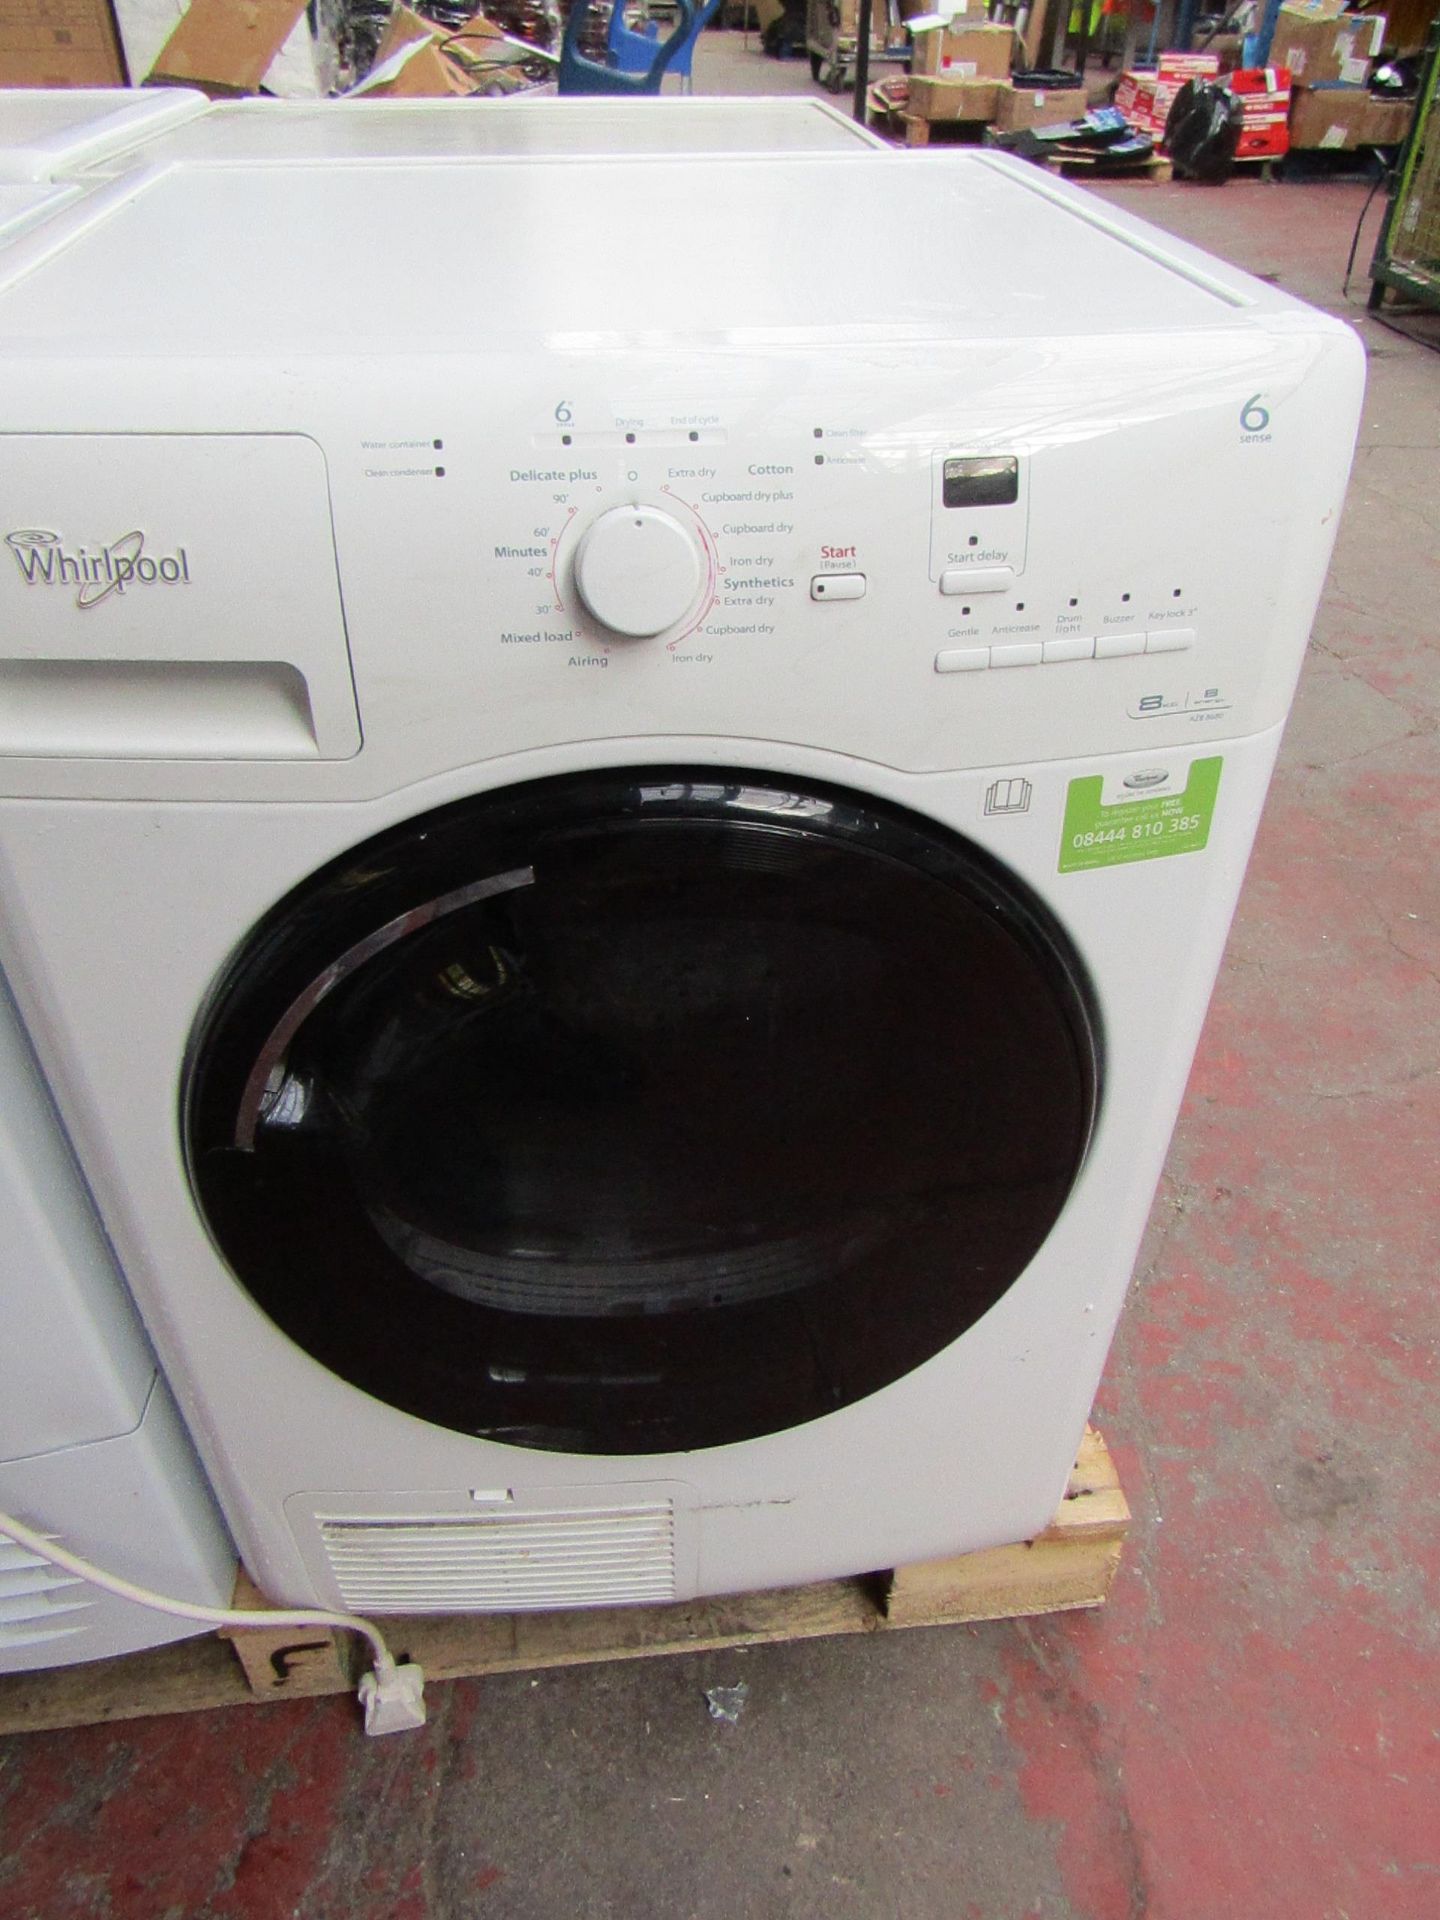 Whirlpool 6th Sense 8Kg condenser dryer, untested due to no plug.